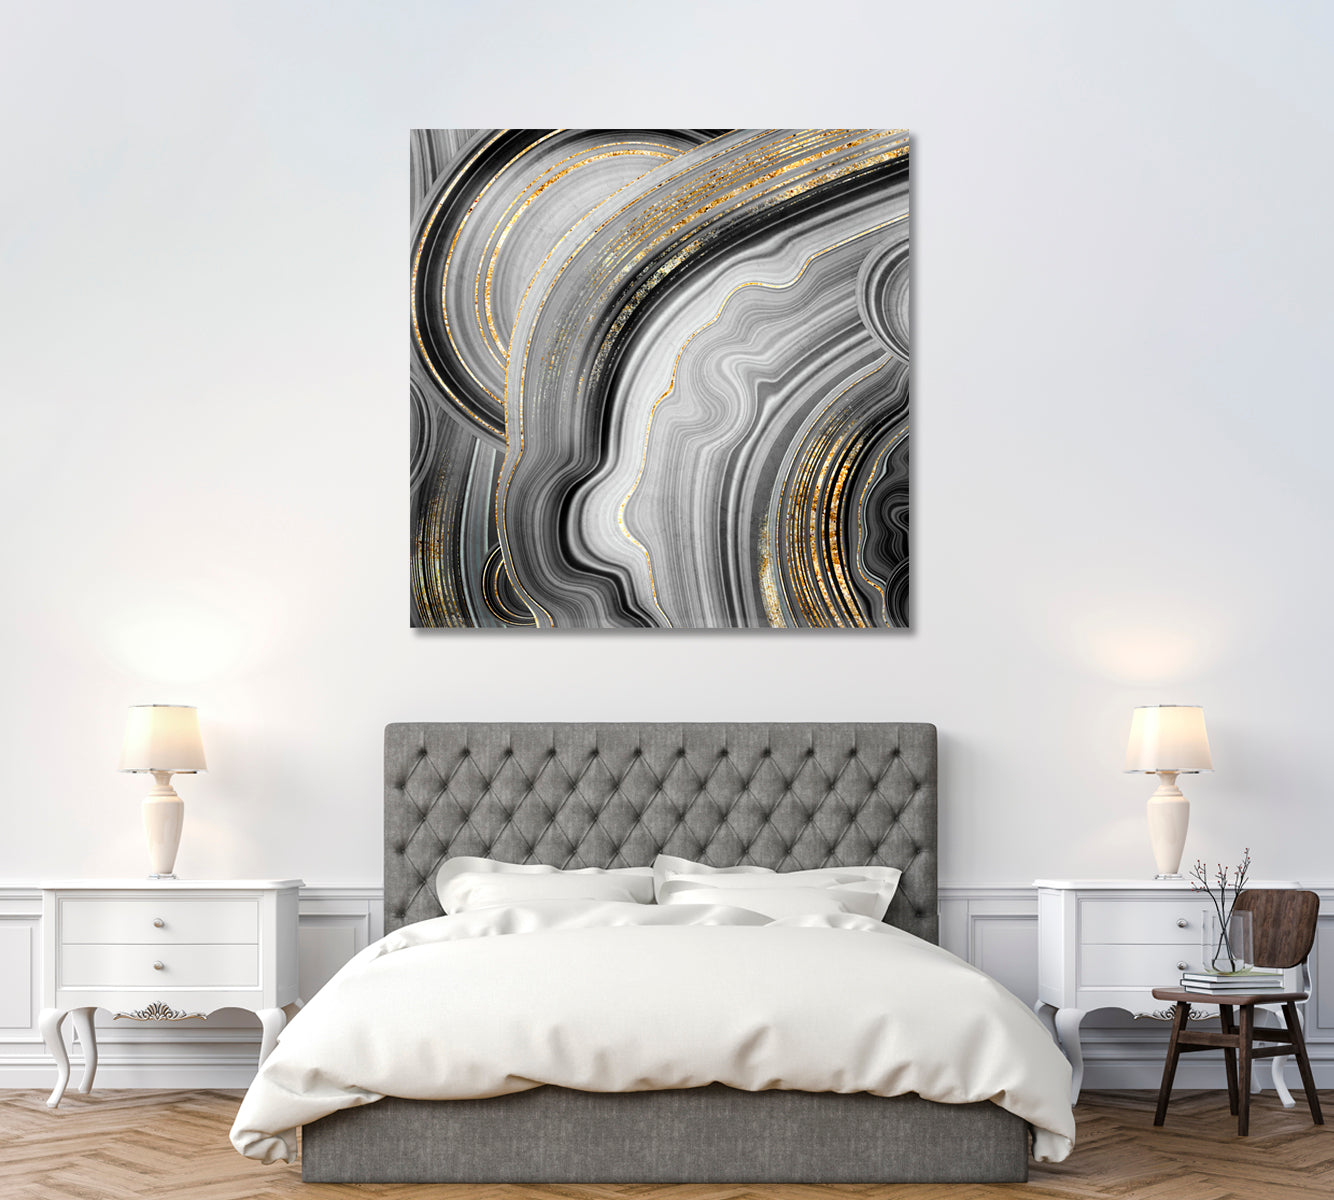 Abstract Agate with Gold Veins Canvas Print ArtLexy 1 Panel 12"x12" inches 